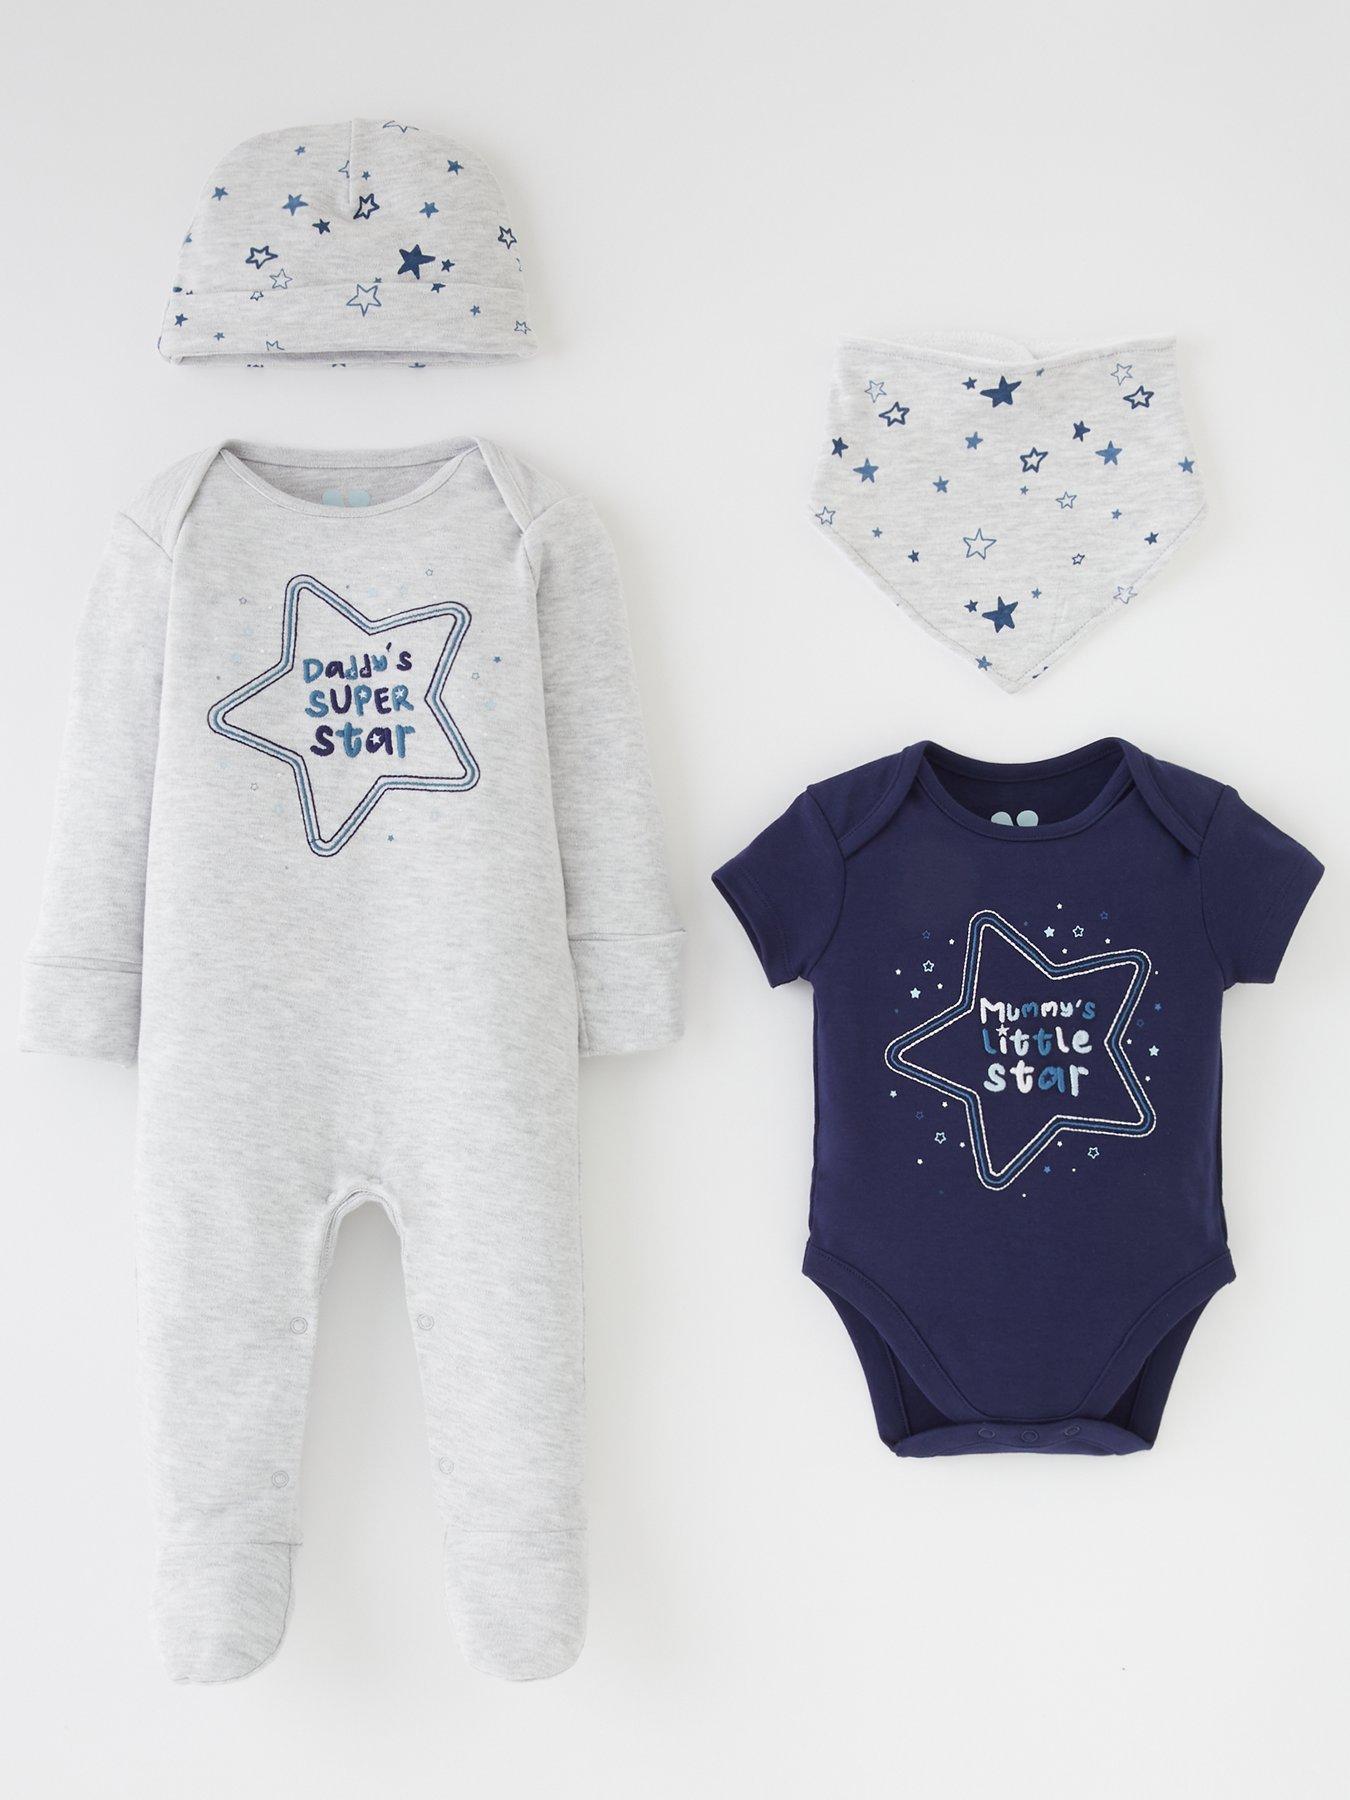 Soft Cotton Onesies; Sleepsuits with Cute Animal Design in White and Blue; Pramsuits from 0 to 18 Months 2 Pack Newborn and Baby Grows 